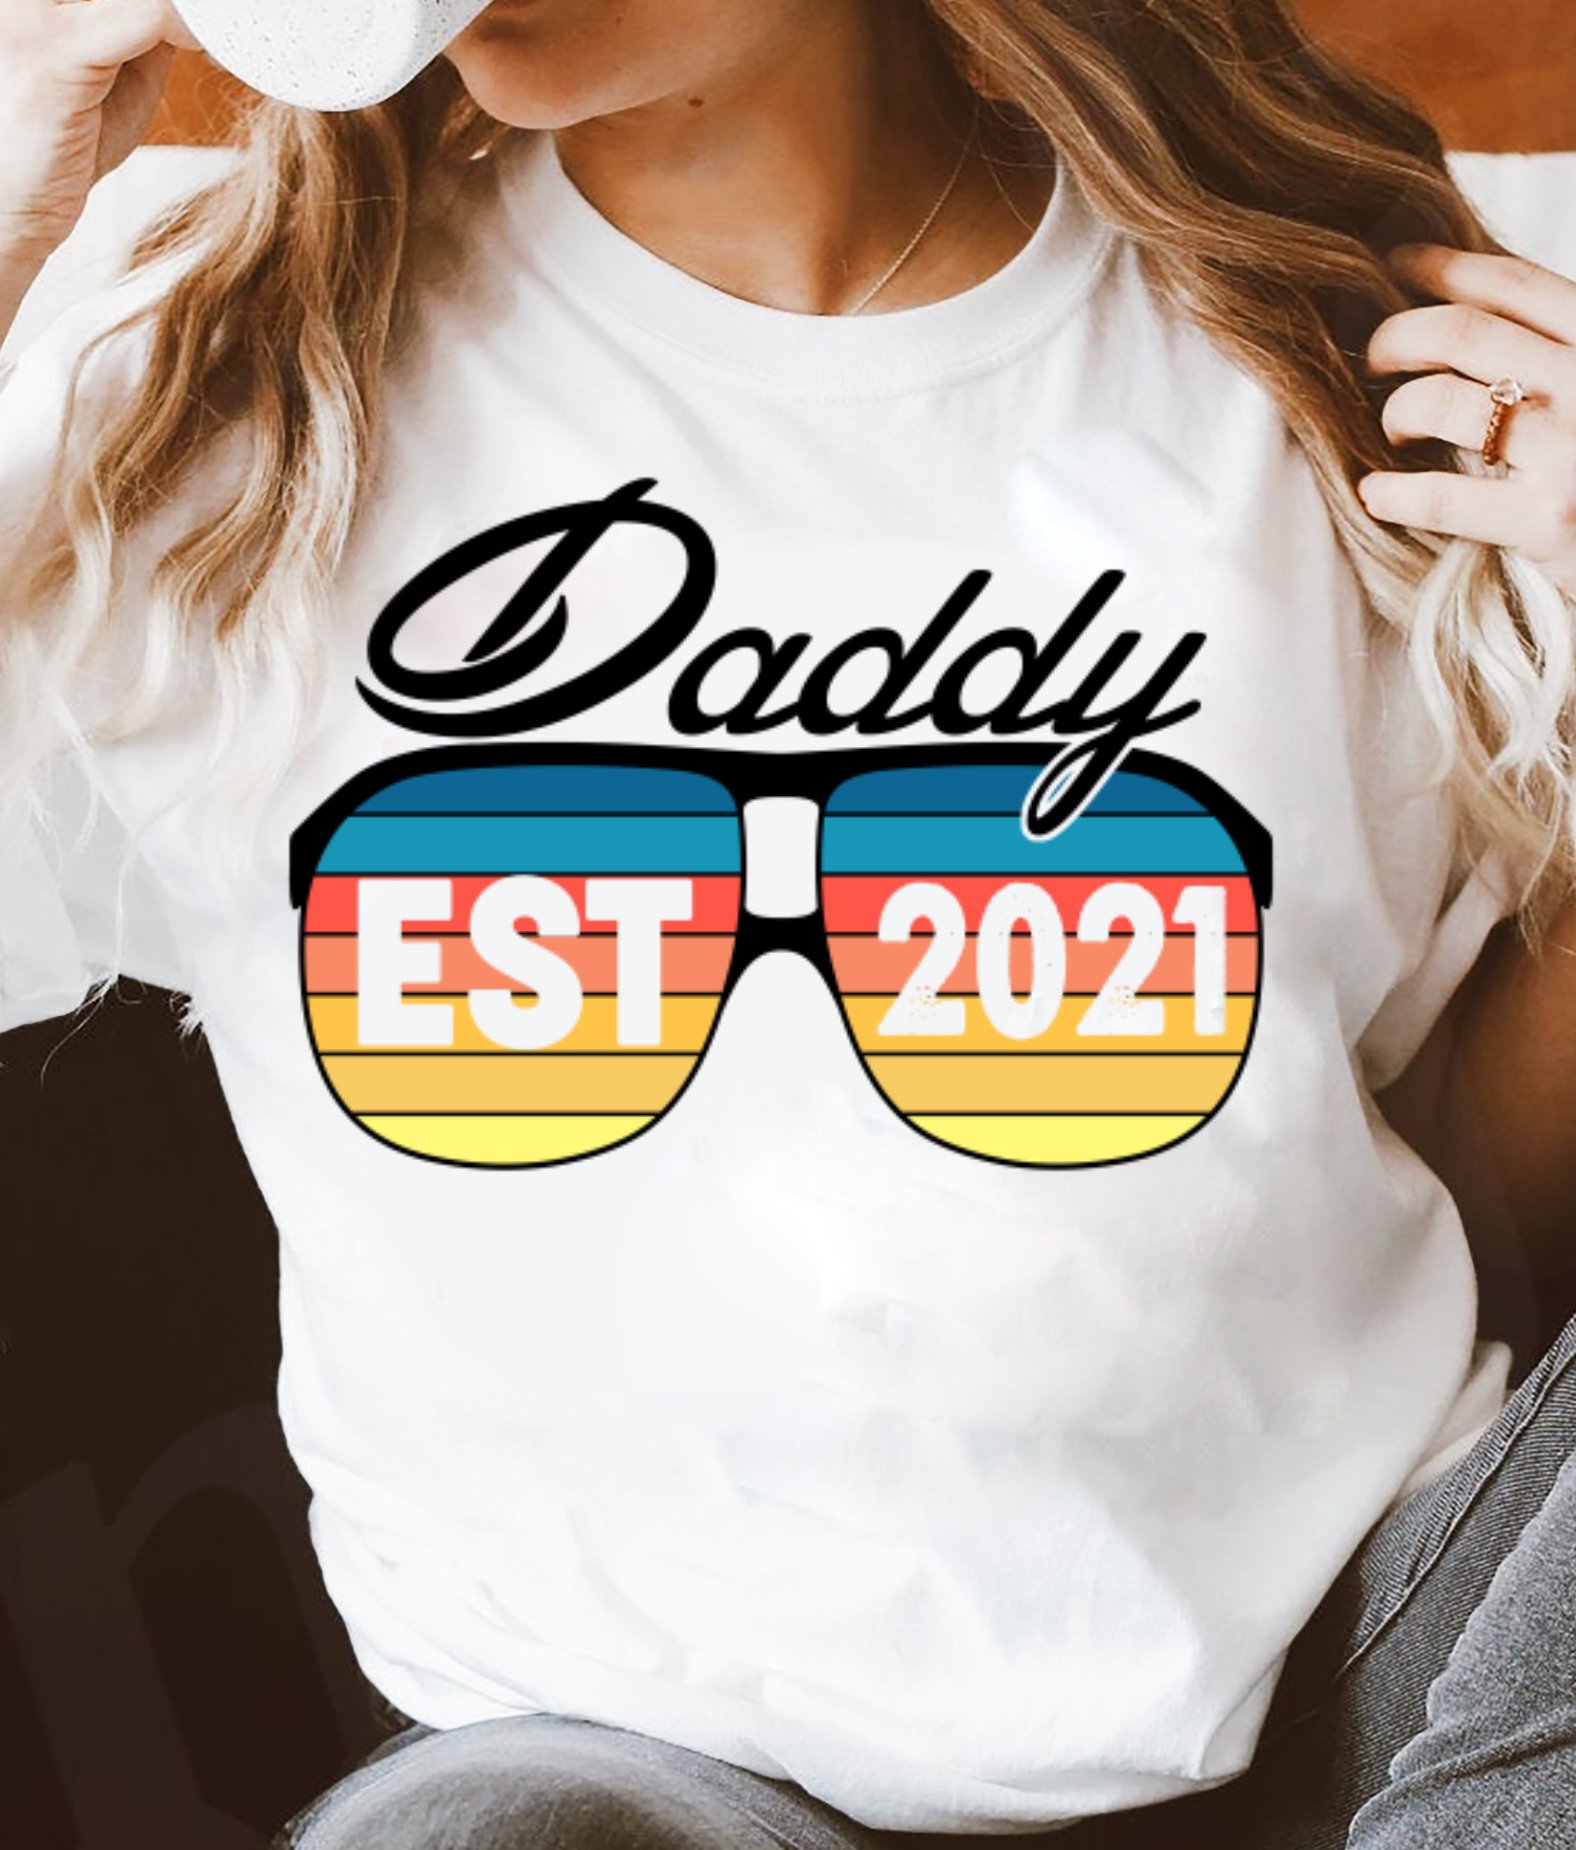 Best Gift For Father's Day, Daddy Shirt, Shirt For Dad, Daddy EST 2021 Vintage Sunglasses Unisex T-Shirt